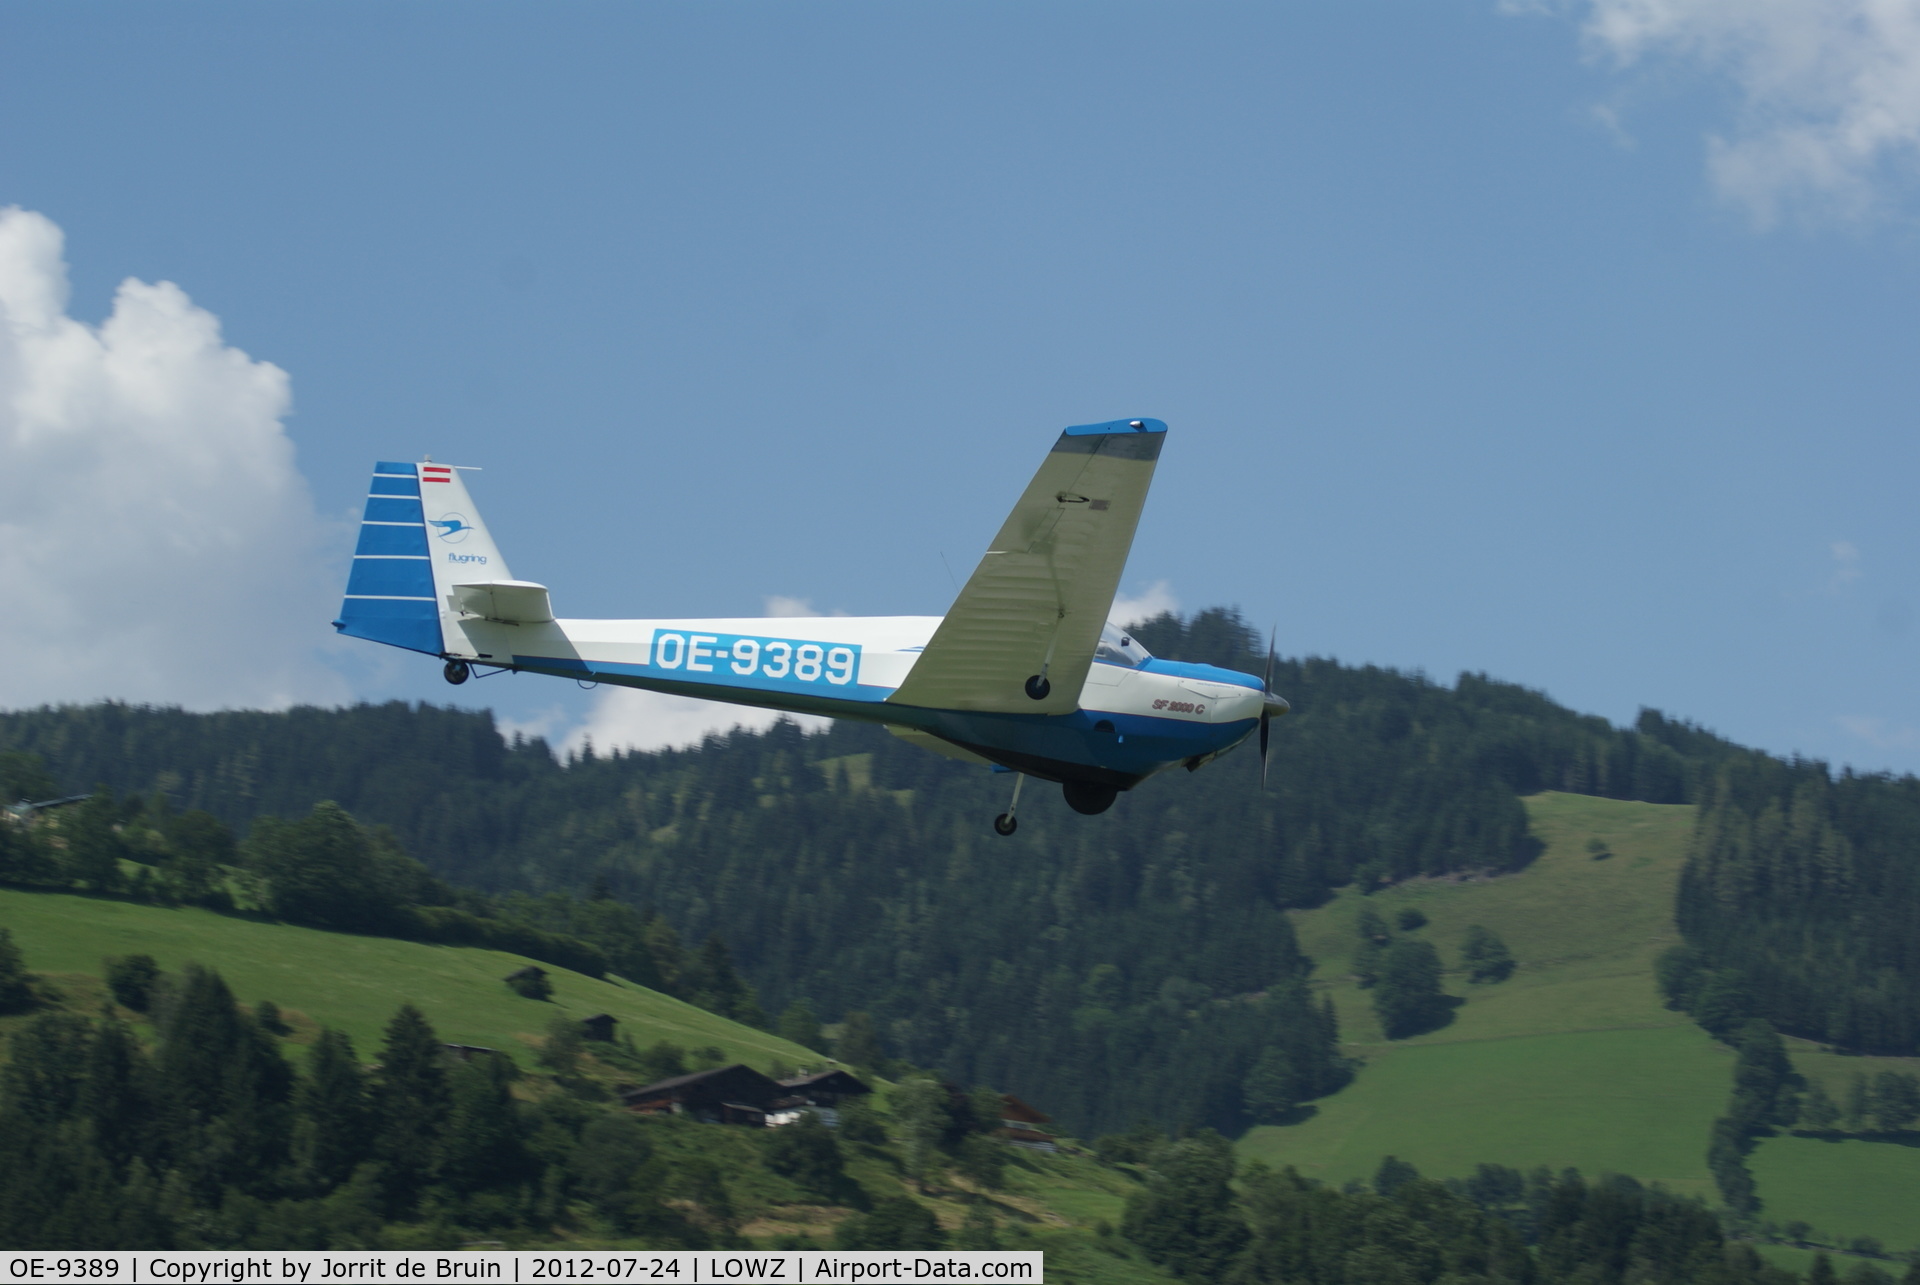 OE-9389, Scheibe SF-25C Falke C/N 44433, After a sunny gliding between the cool mountains the motorglider Scheibe thinks it enough. He just turns into the approach and simply exerts the landing of runway 08 at Zell am See.